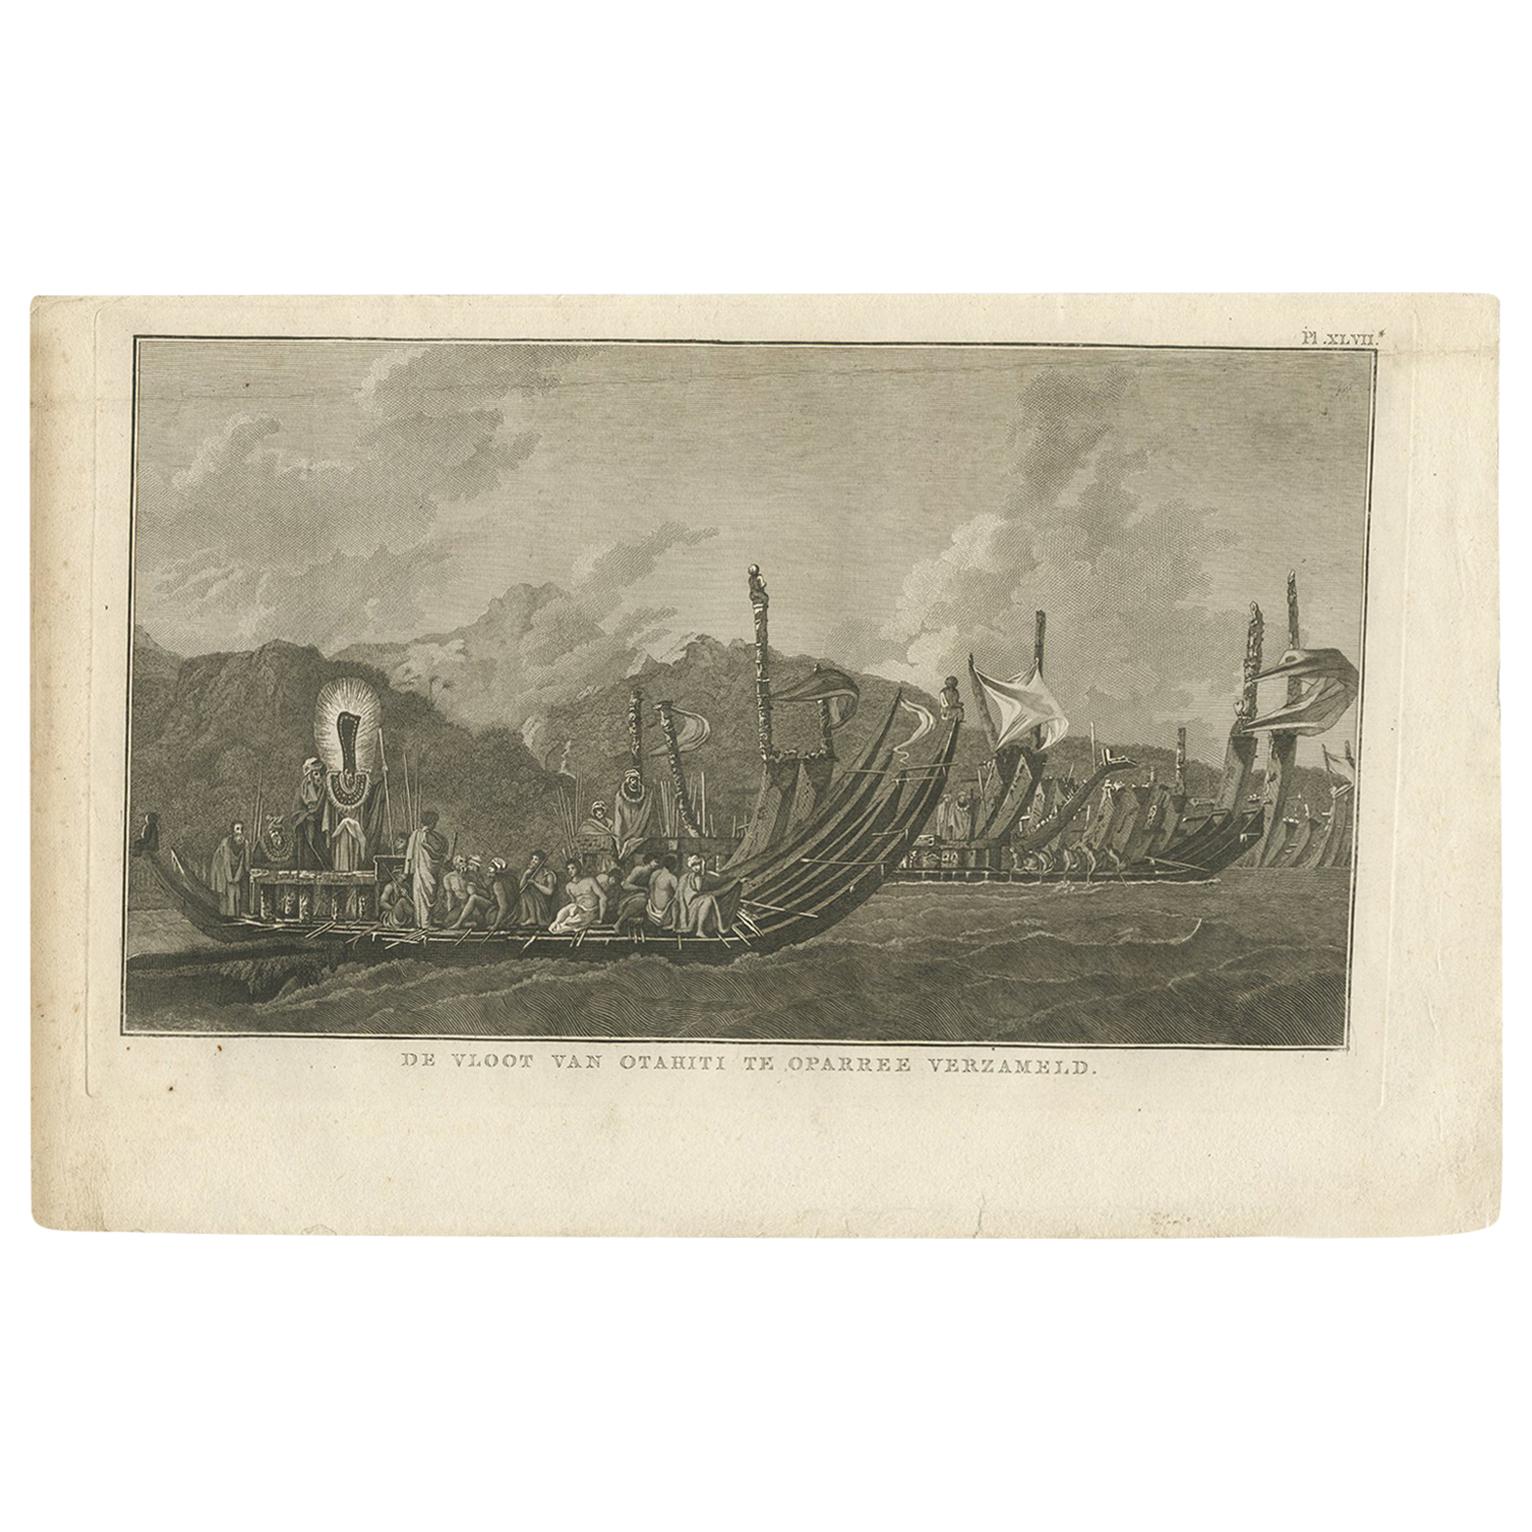 Antique Print of the Fleet of Proas of Tahiti by Cook, 1803